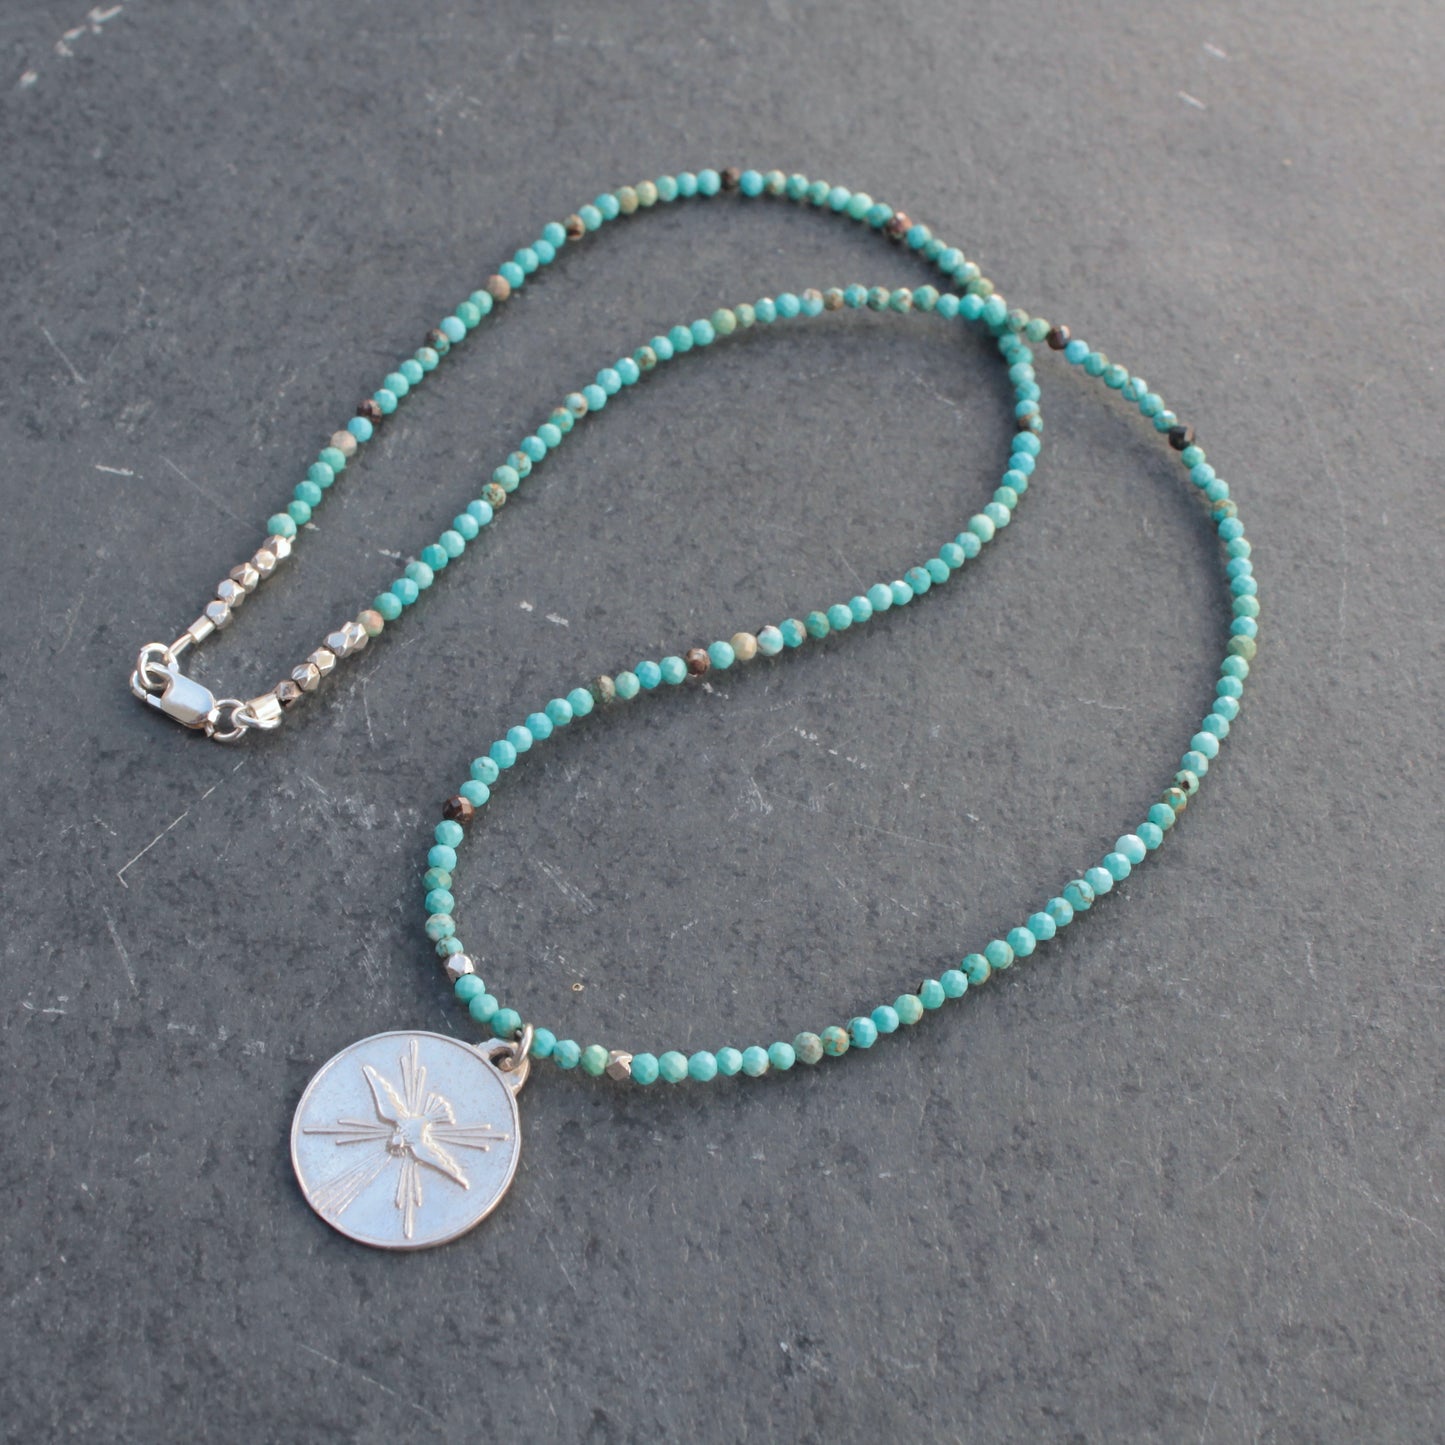 Turquoise Choker Necklace with Silver Dove Pendant